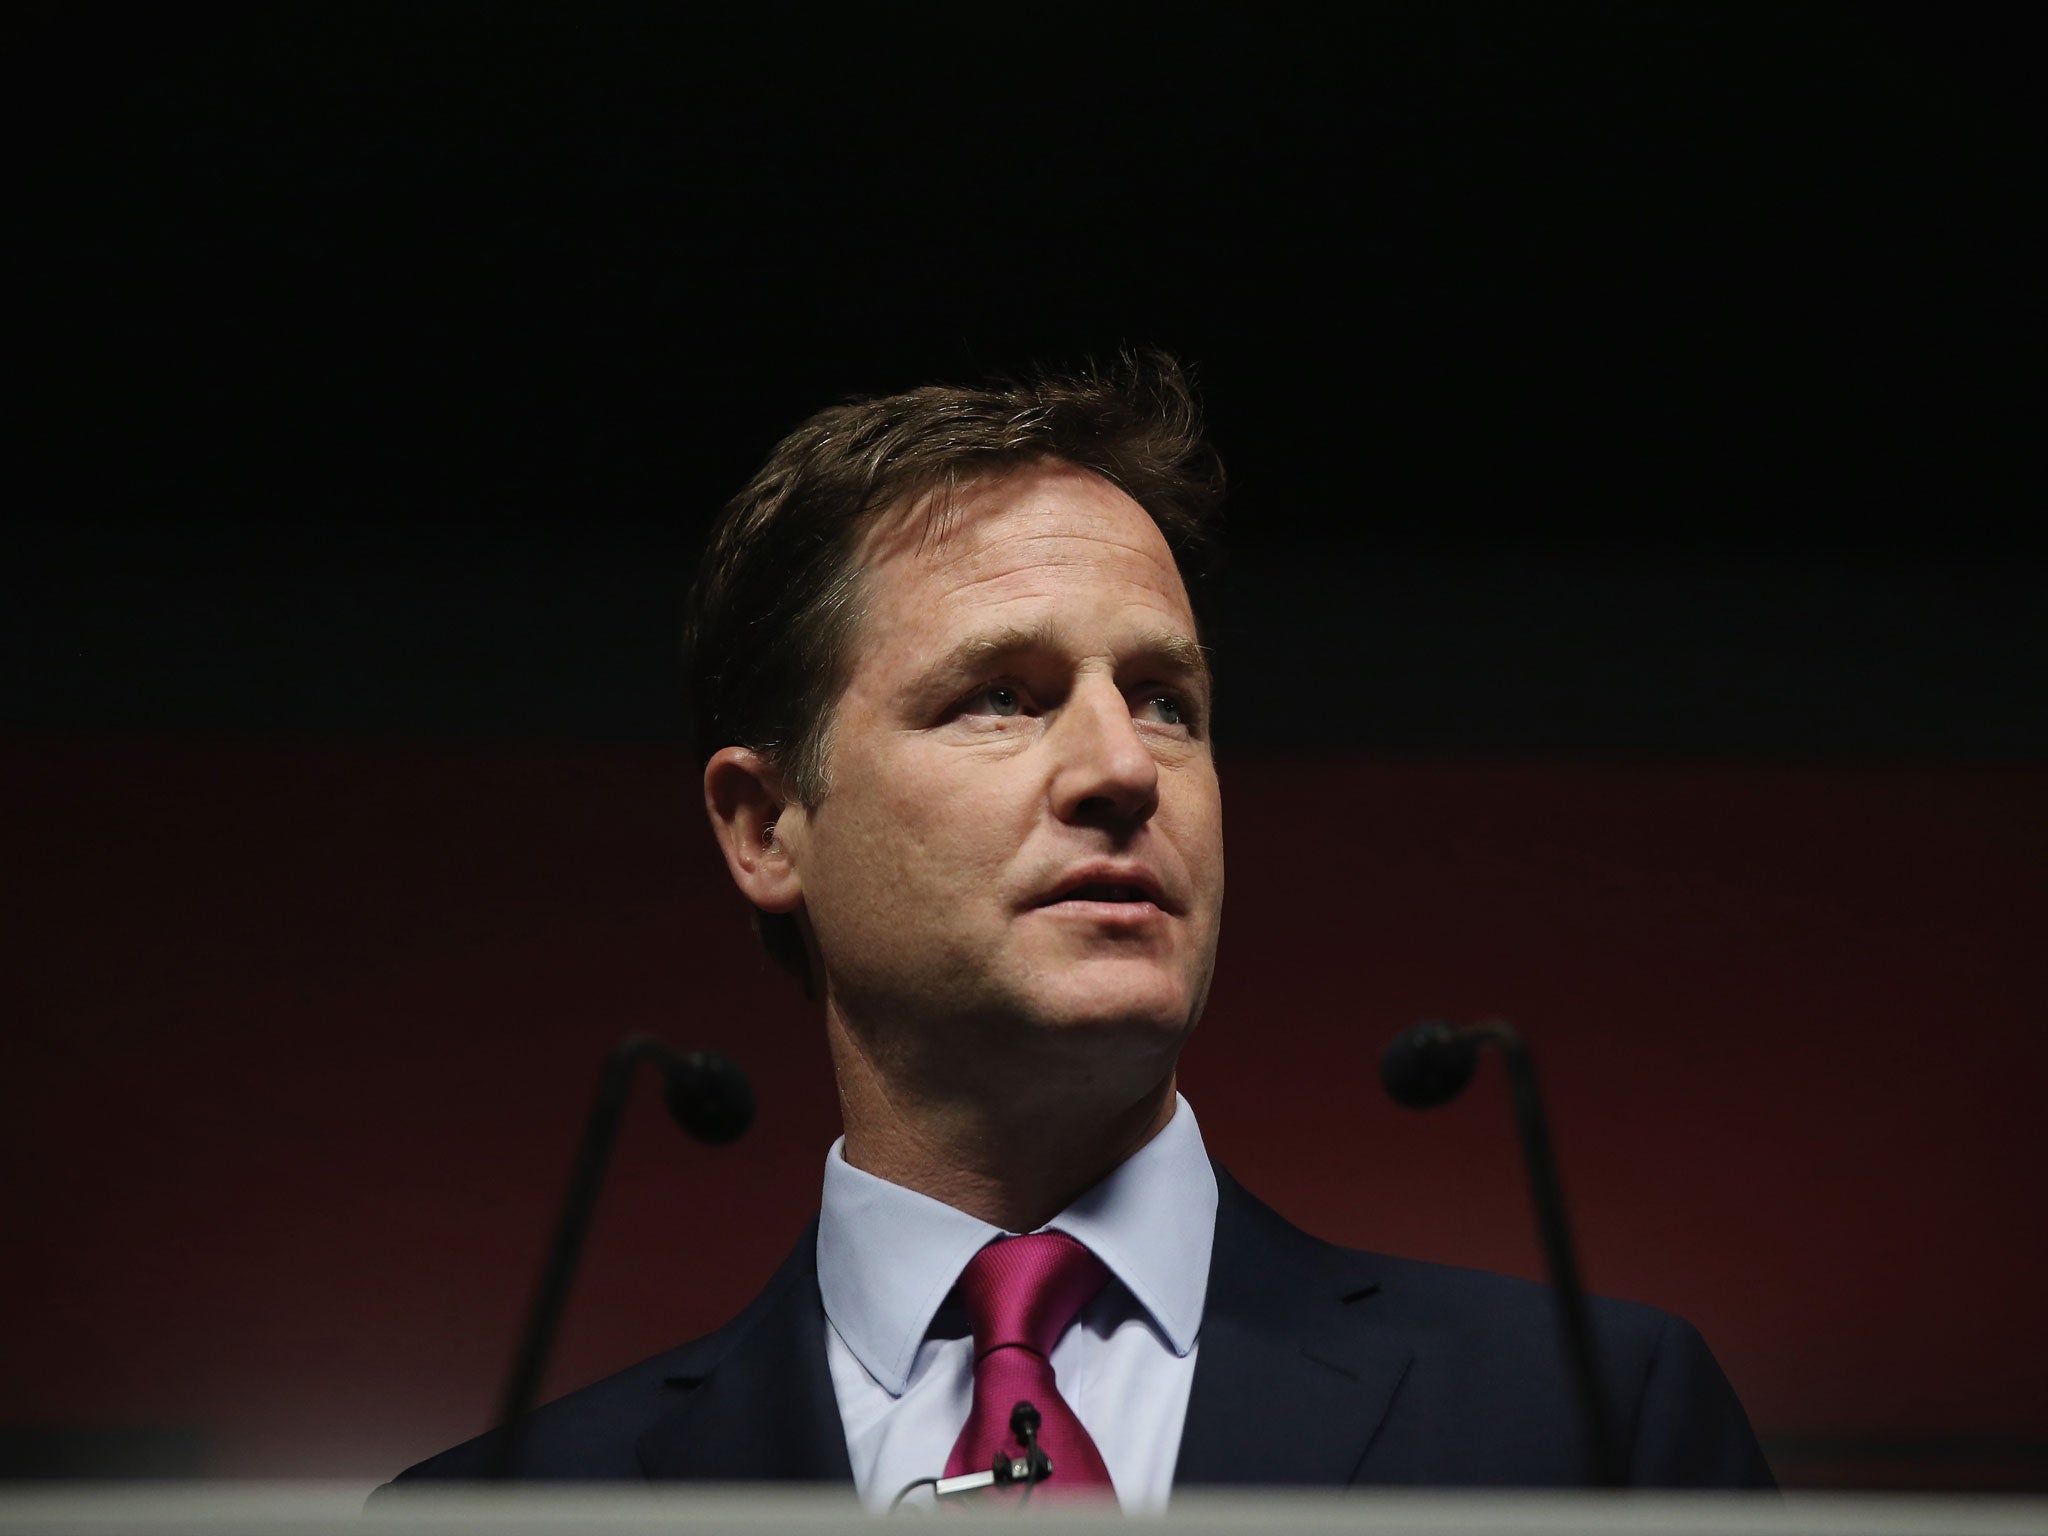 Whether or not Clegg loses the seat Hallam will be one of the biggest battles under the spotlight on election night